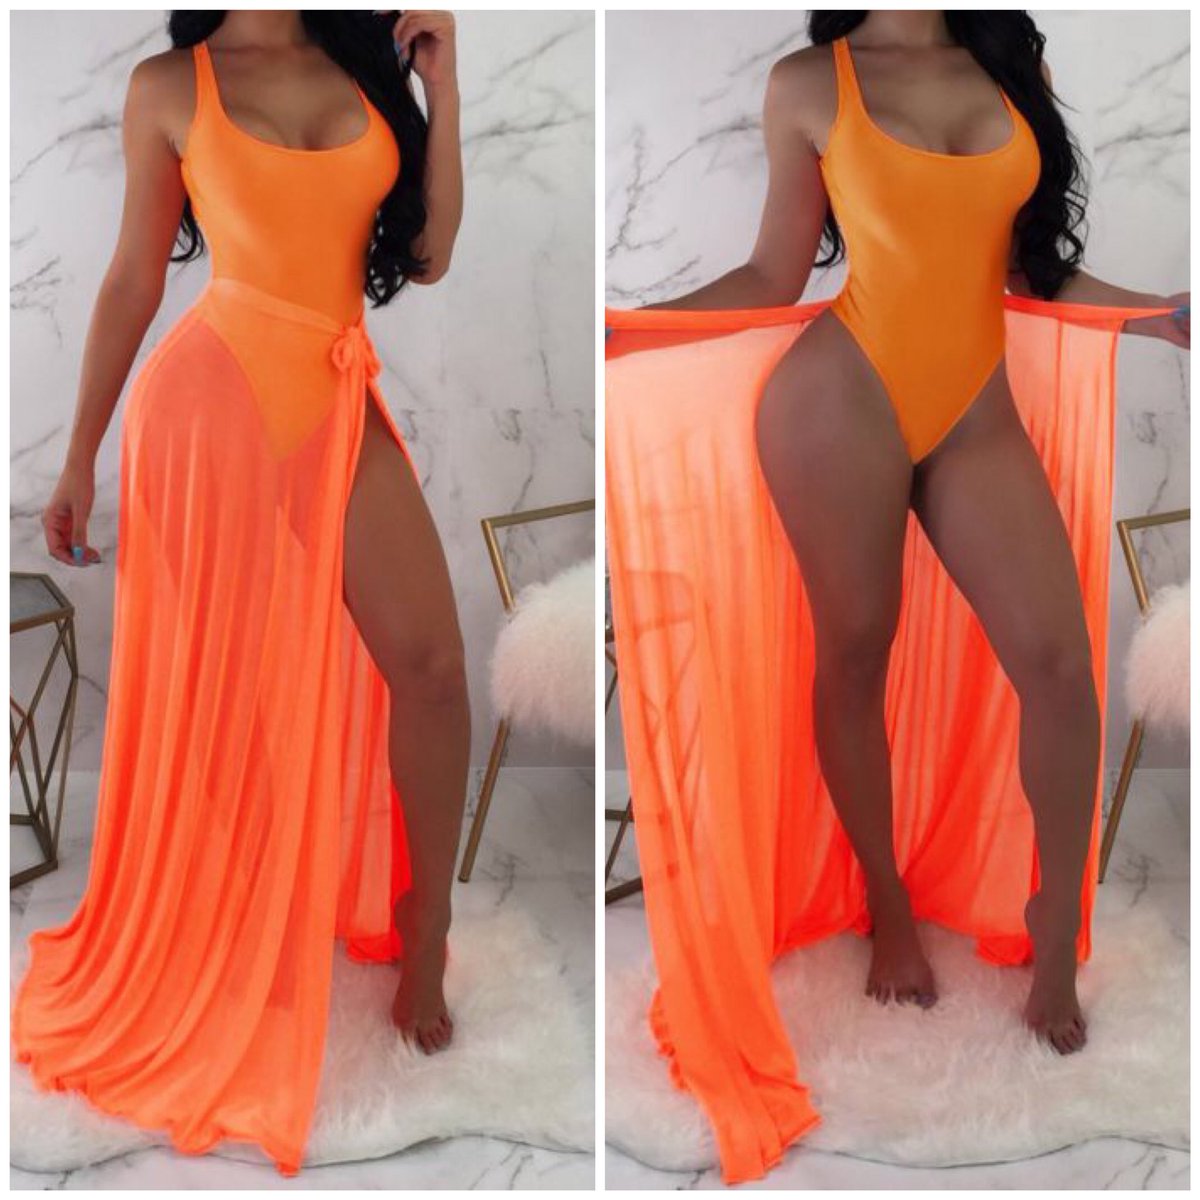 🔥HOT SUMMER ARRIVALS🔥
SEARCH: SWIMSUITS 
SHOP: sheisclassy.com

#swimgear #swimsuit #bikini #orangebikini #orangeswimsuit #orangefashion #womenswear #poolparty #beachlife #fashion #sheisclassyboutique #instyle